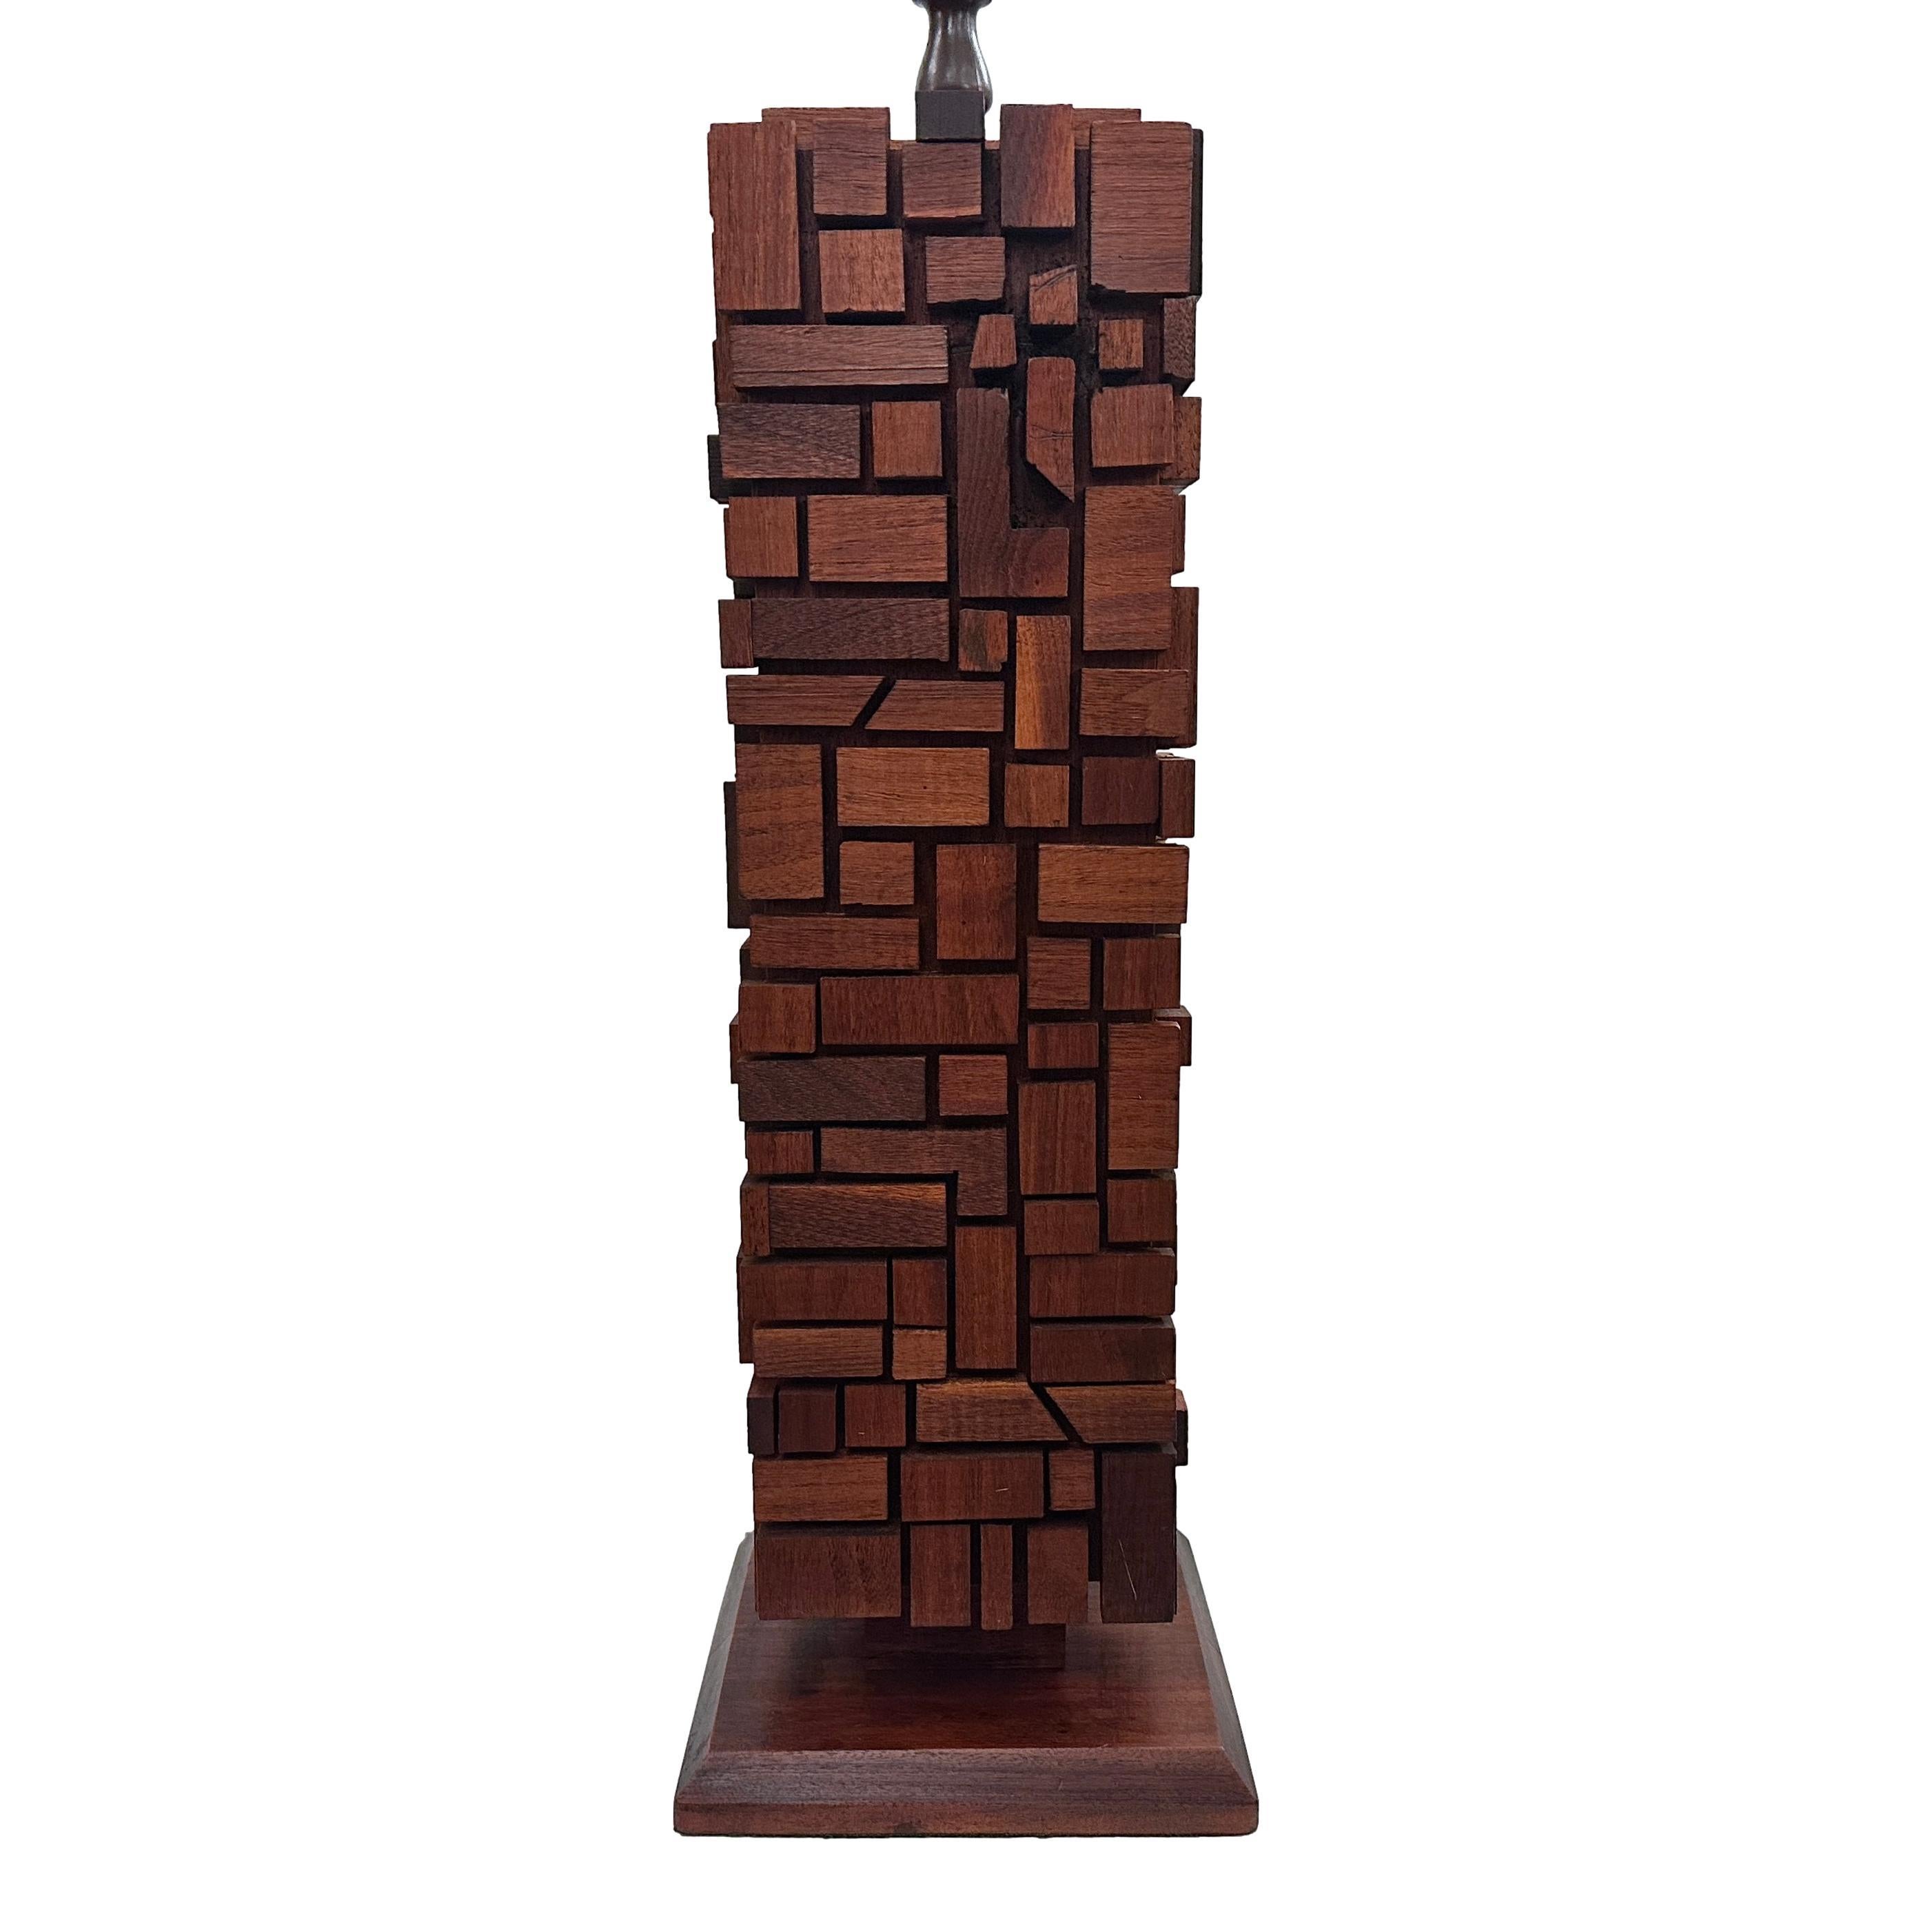 A circa 1960's Italian wooden lamp with abstract design.

Measurements:
Height of body: 21